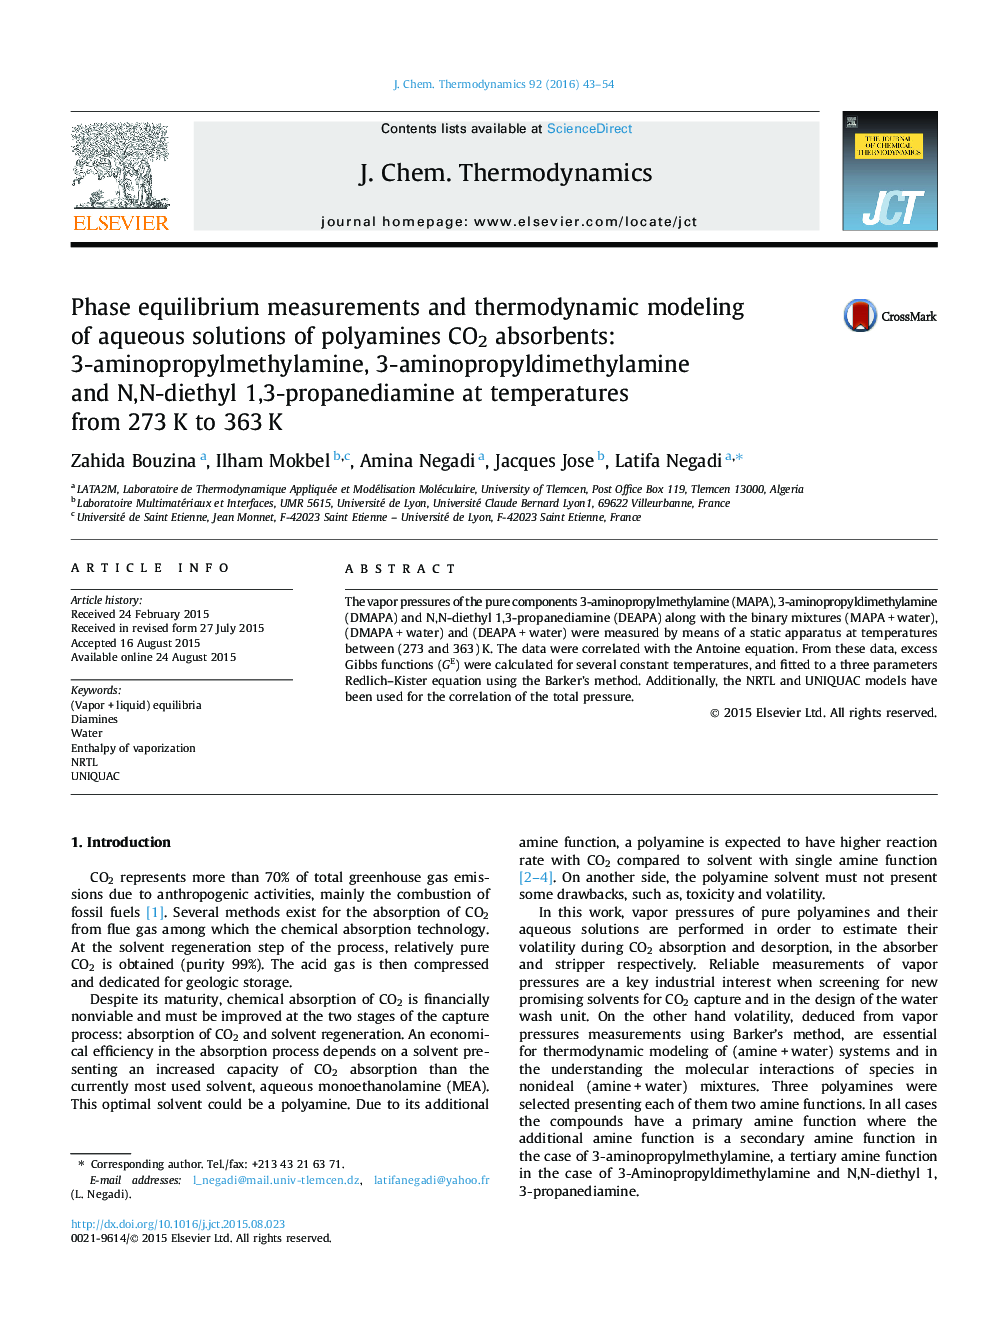 Phase equilibrium measurements and thermodynamic modeling of aqueous solutions of polyamines CO2 absorbents: 3-aminopropylmethylamine, 3-aminopropyldimethylamine and N,N-diethyl 1,3-propanediamine at temperatures from 273 K to 363 K